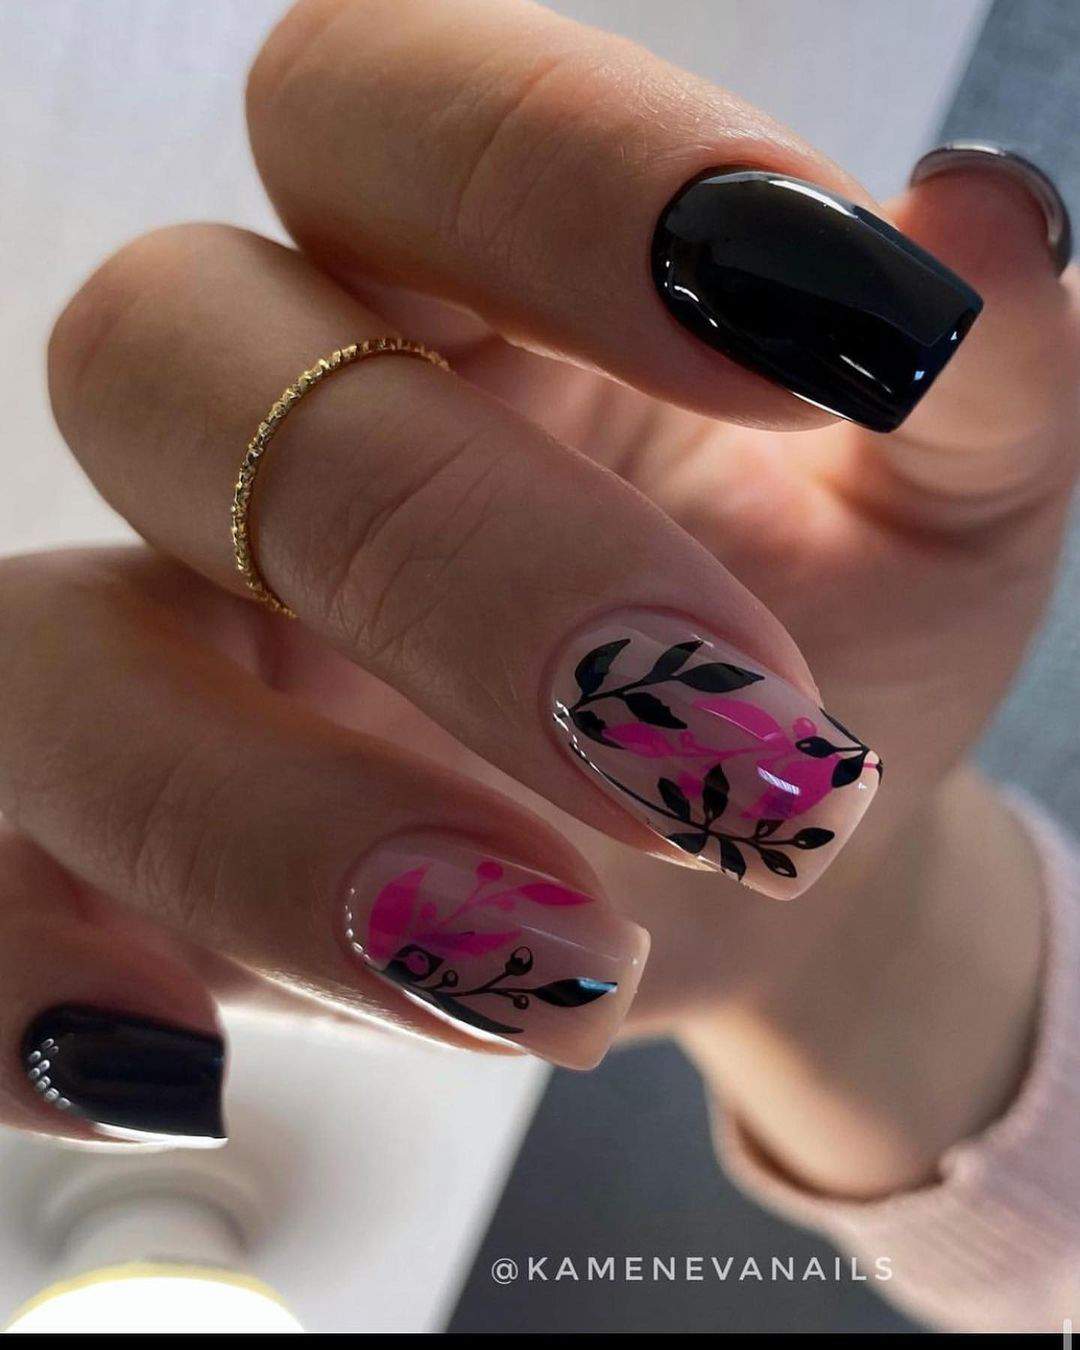 50 Best Nail Designs Trends To Try Out In 2022 images 29